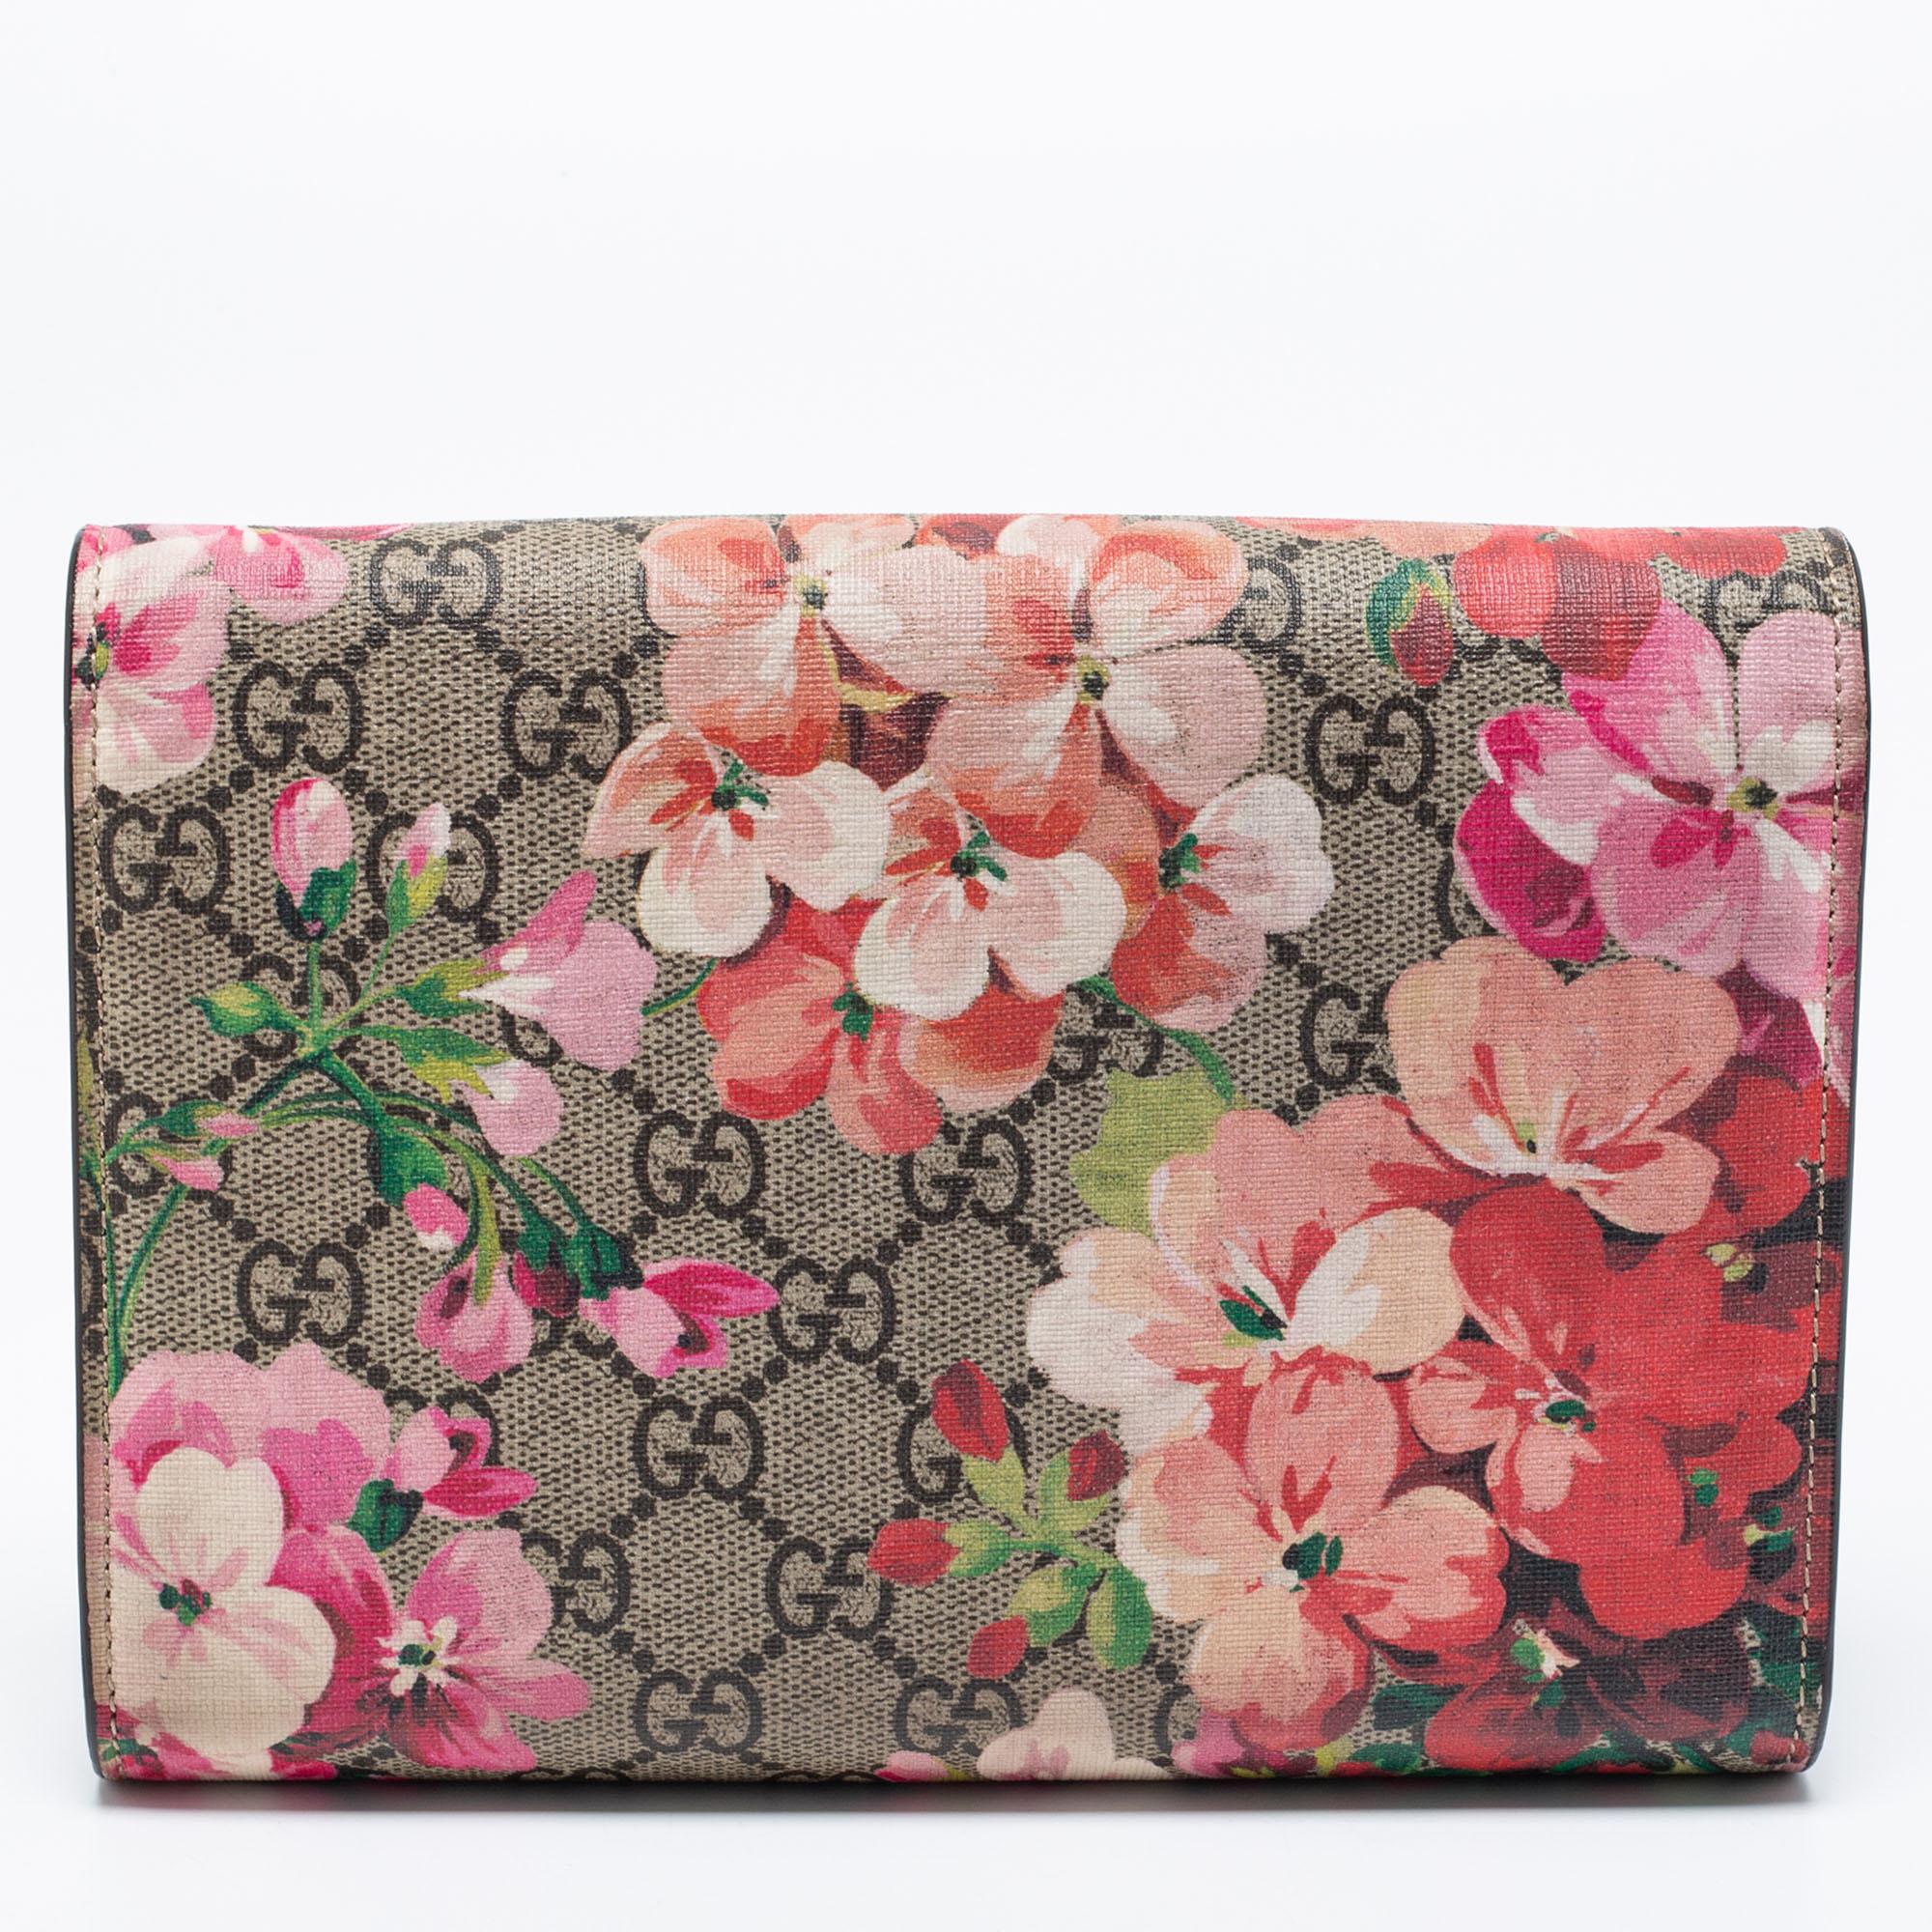 Gucci's Dionysus collection is inspired by the Greek God who is believed to have crossed the Tigris river on a tiger given to him by his father, Zeus. This creation has been beautifully made from GG Supreme canvas and leather with Blooms print. The